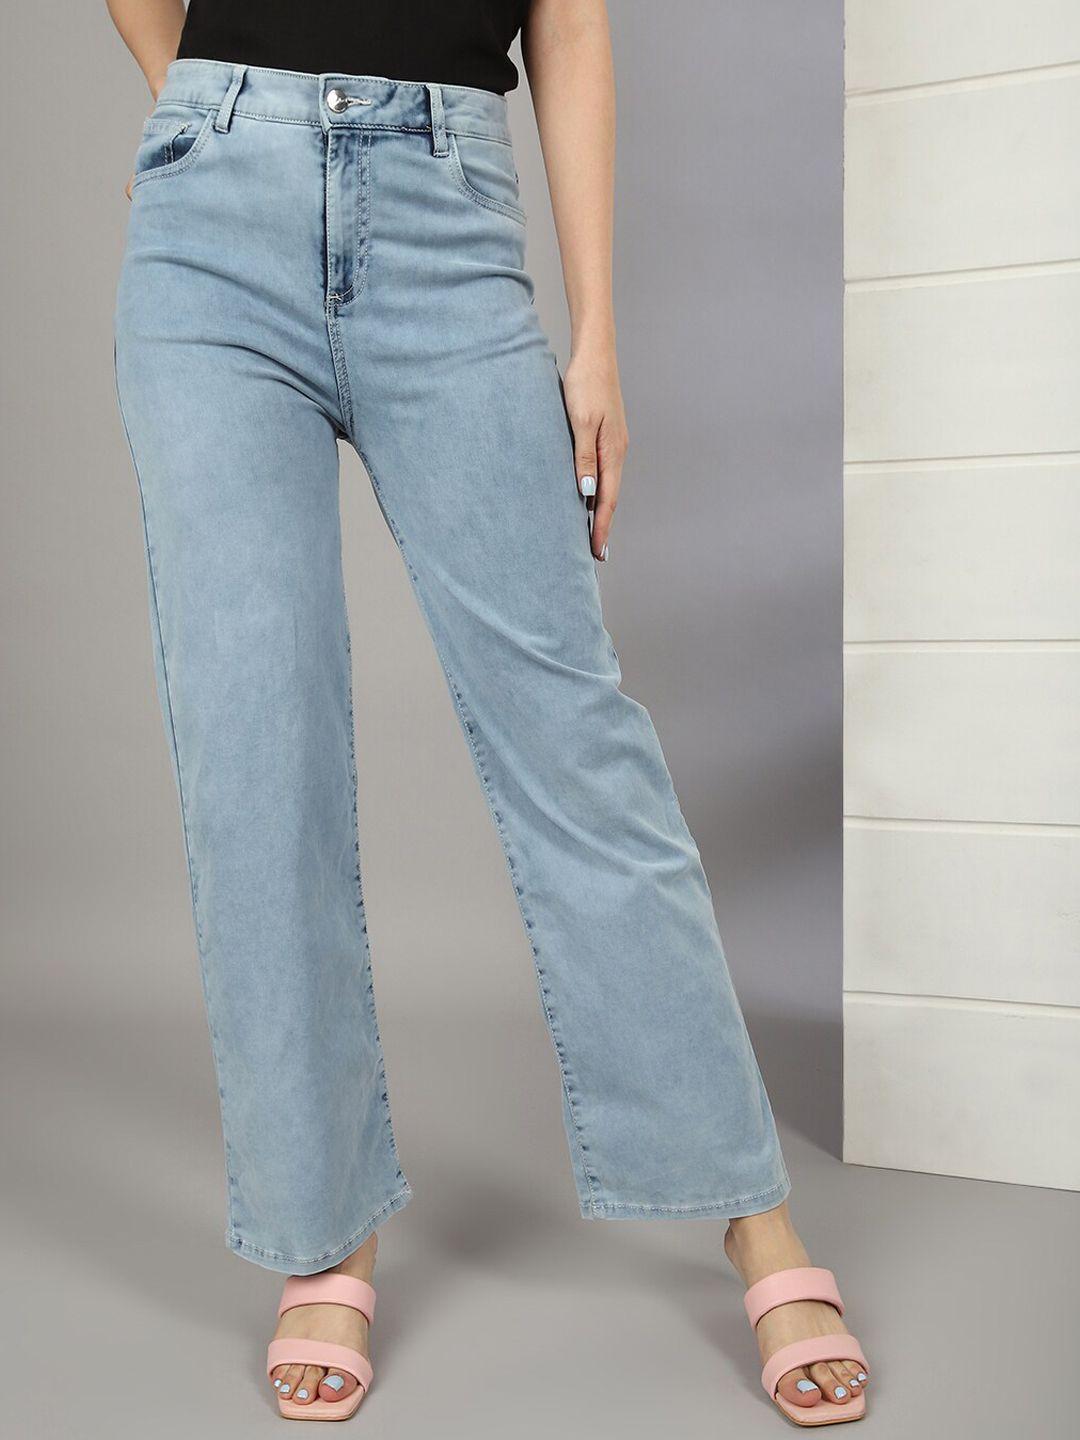 freehand women relaxed fit high-rise heavy fade cotton jeans